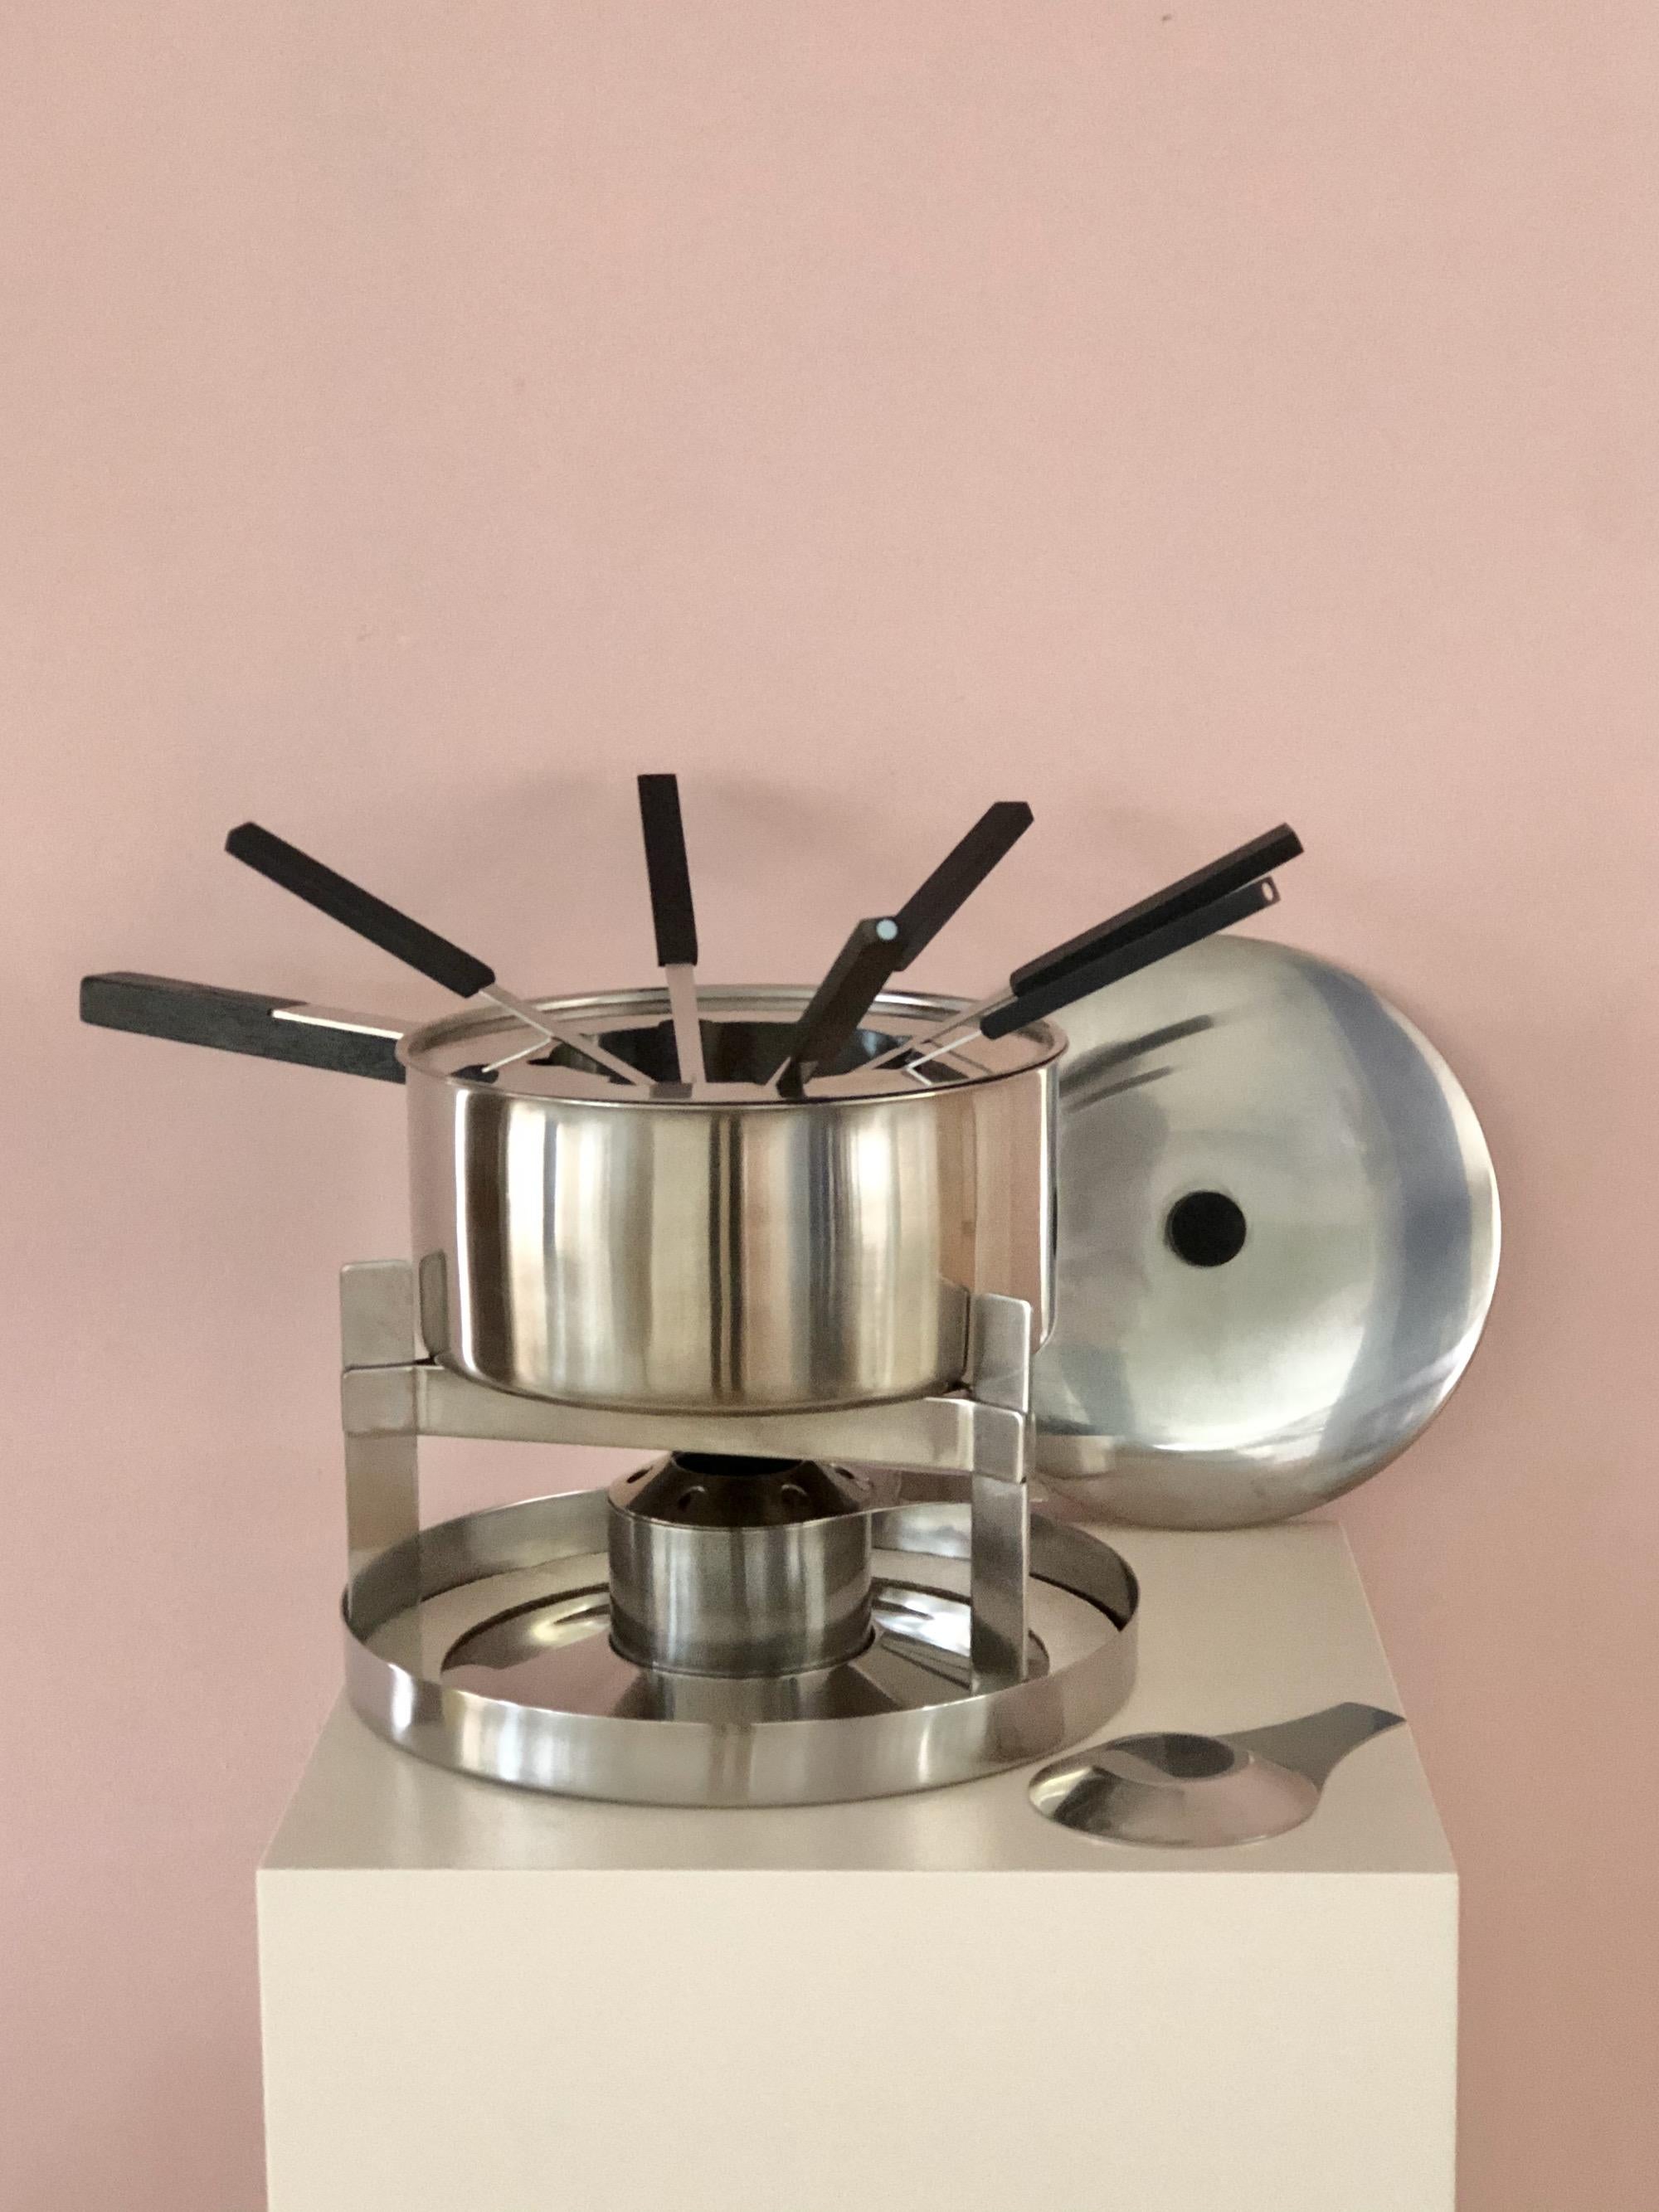 Stainless steel fondue set with wood handle, designed by Danish mid-century designer Peter Homblad (stepson from Arne Jacobsen) for Stelton, Made in Denamrk. This set comes with original Stelton Fondue Forks and is ready to use.